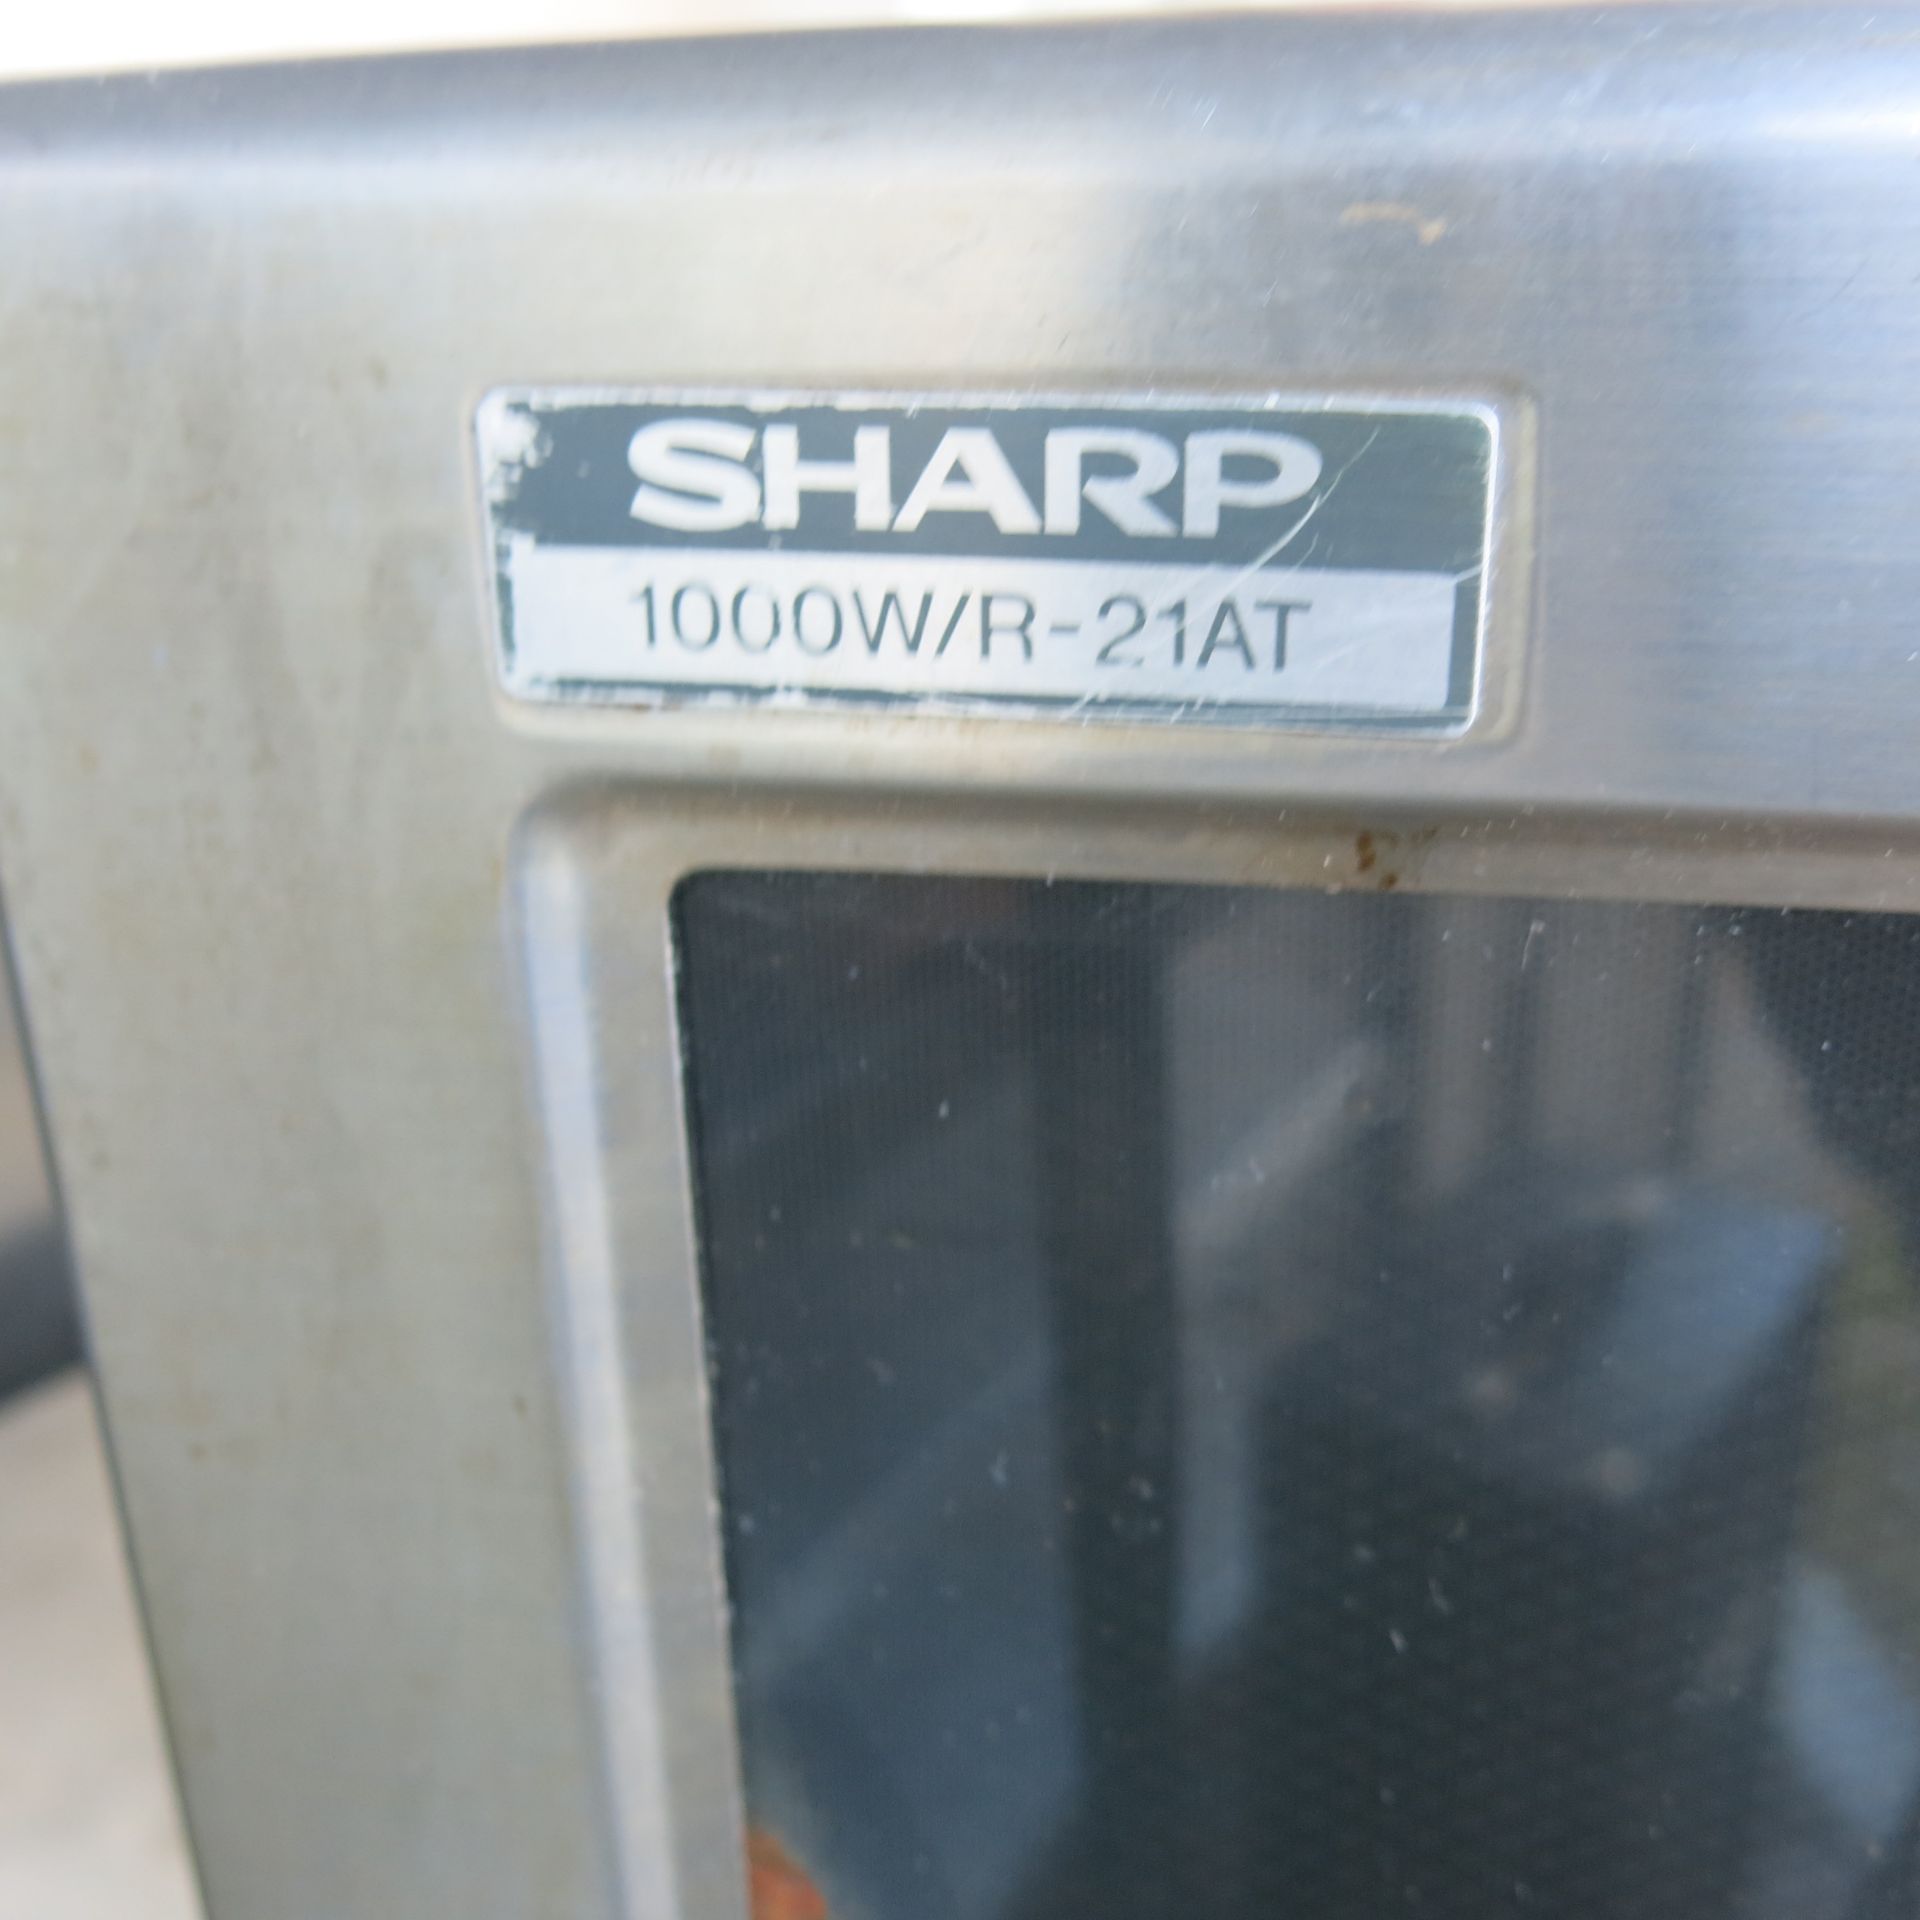 Sharp Commercial Stainless Steel Microwave, Model 1000W/R-21AT - Bild 2 aus 2